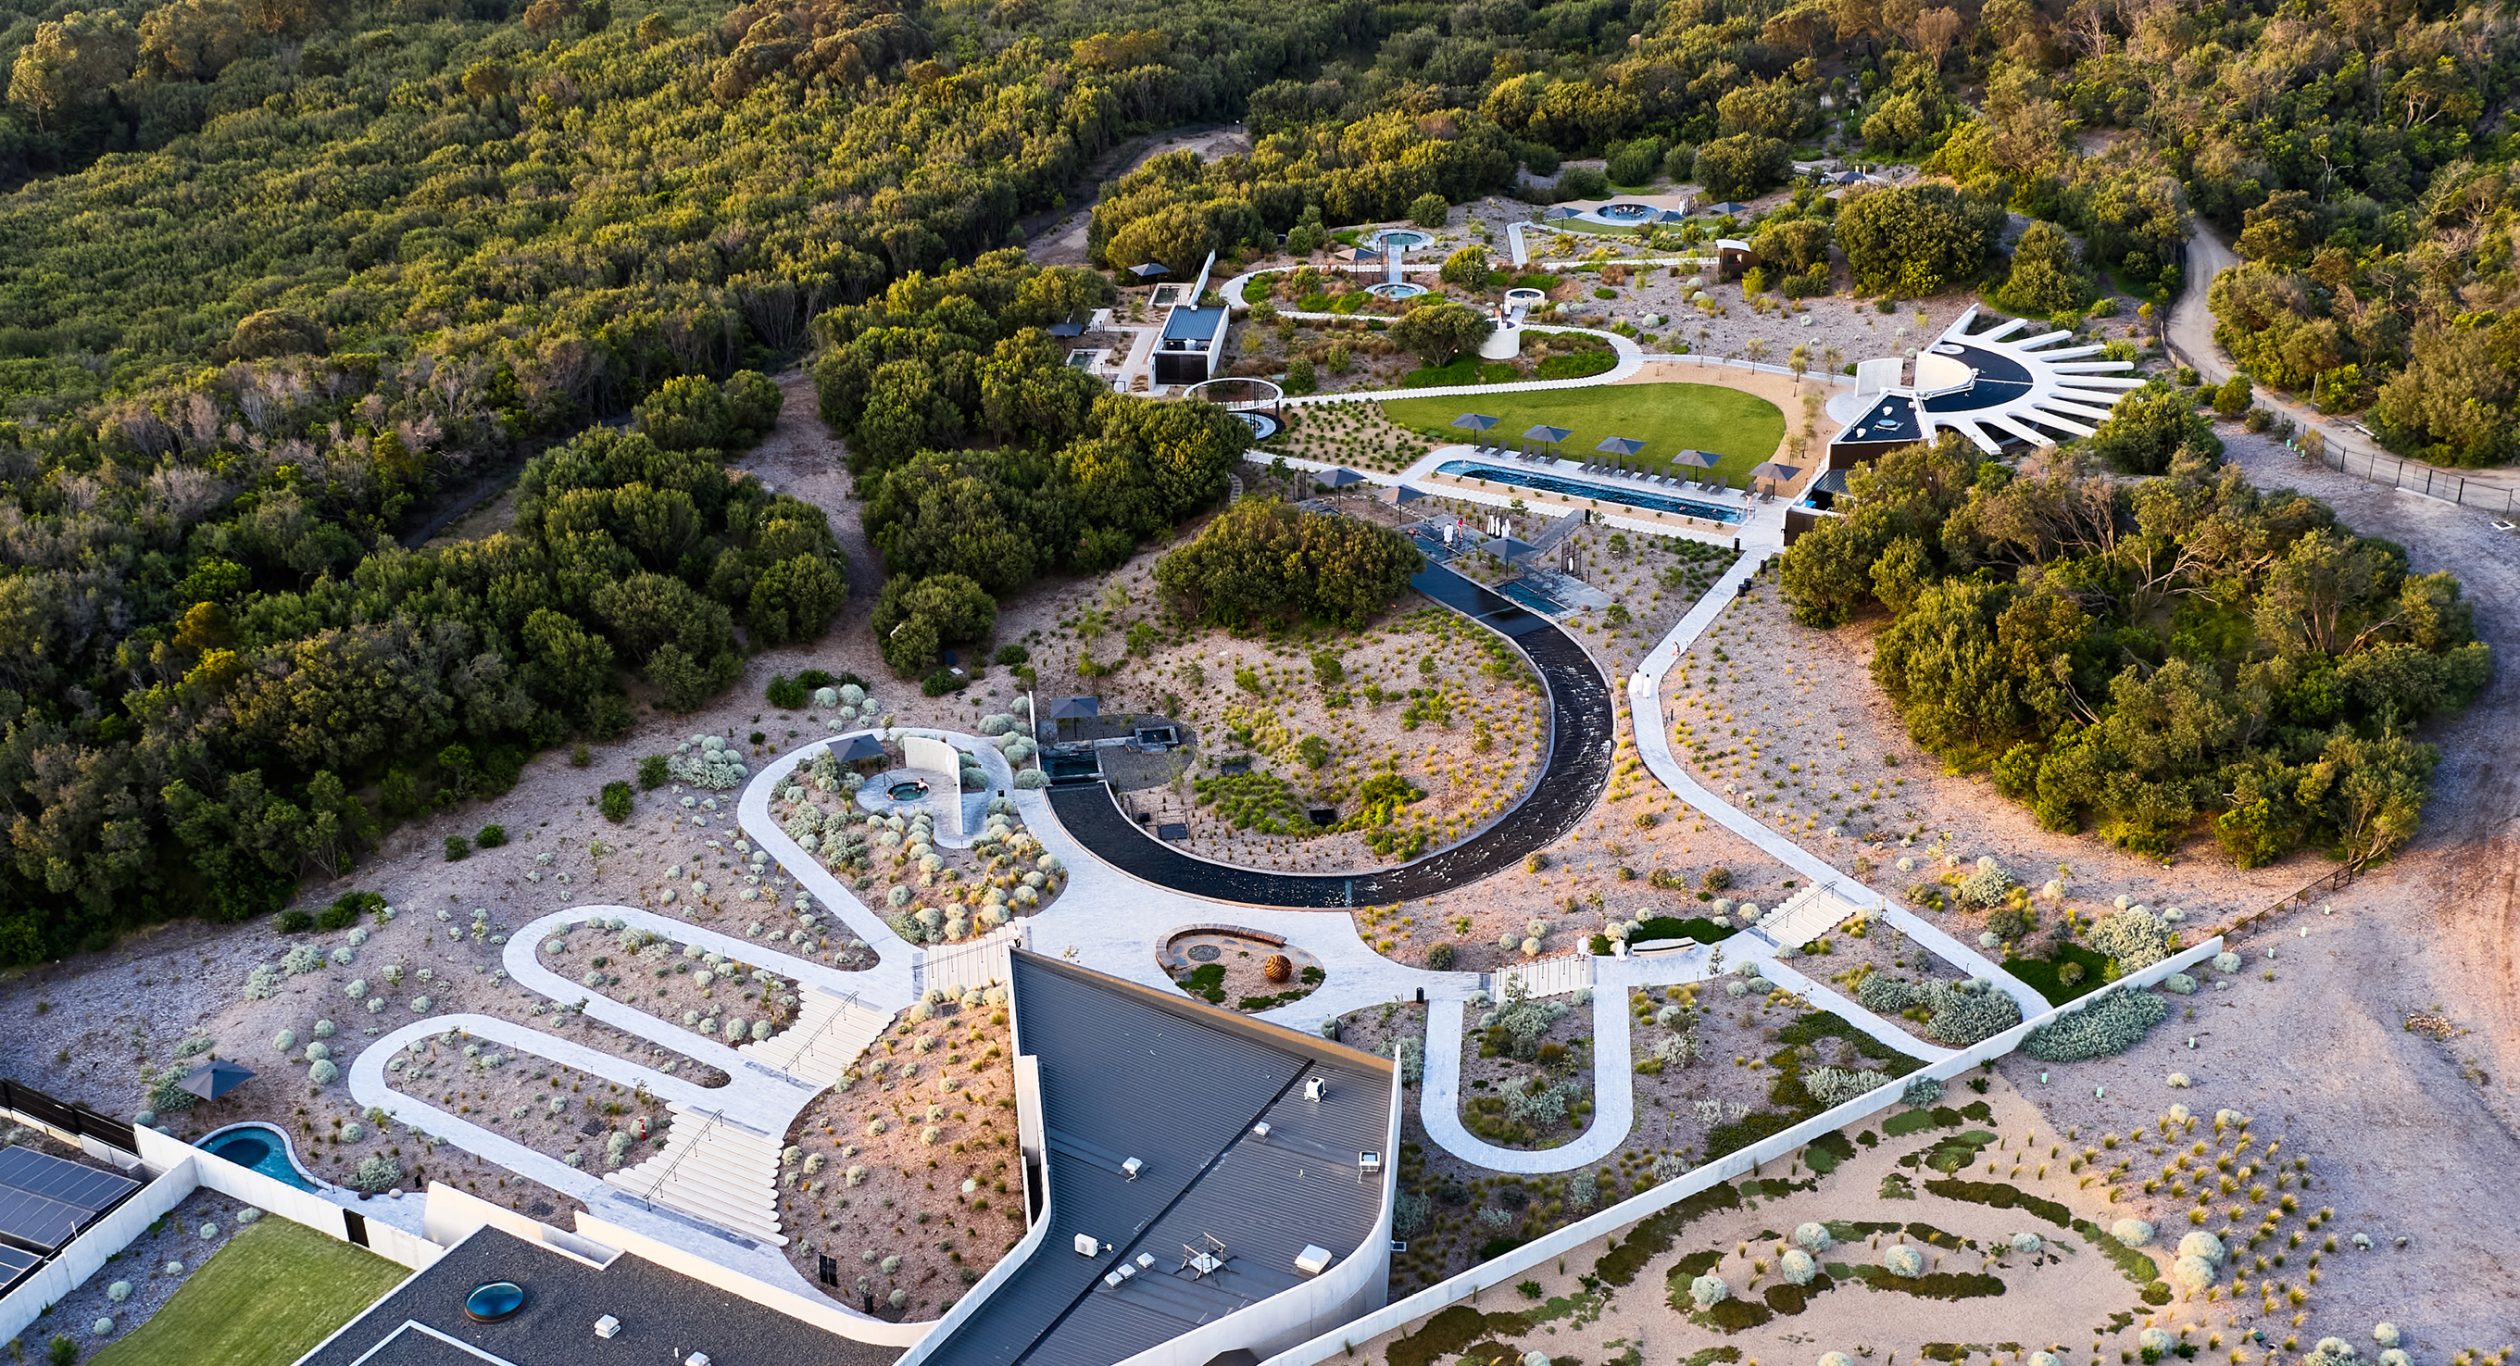 A photo of Alba Thermal Springs from above taken by a drone - the photo shows the buildings designed by architect Hayball nestled amongst the endemic landscape designed bt landscape architect Mala - the photo includes many of the 32 mineral springs that are connected by serpentine paths that encourage guests to wander, explore and be pleasantly surprised.